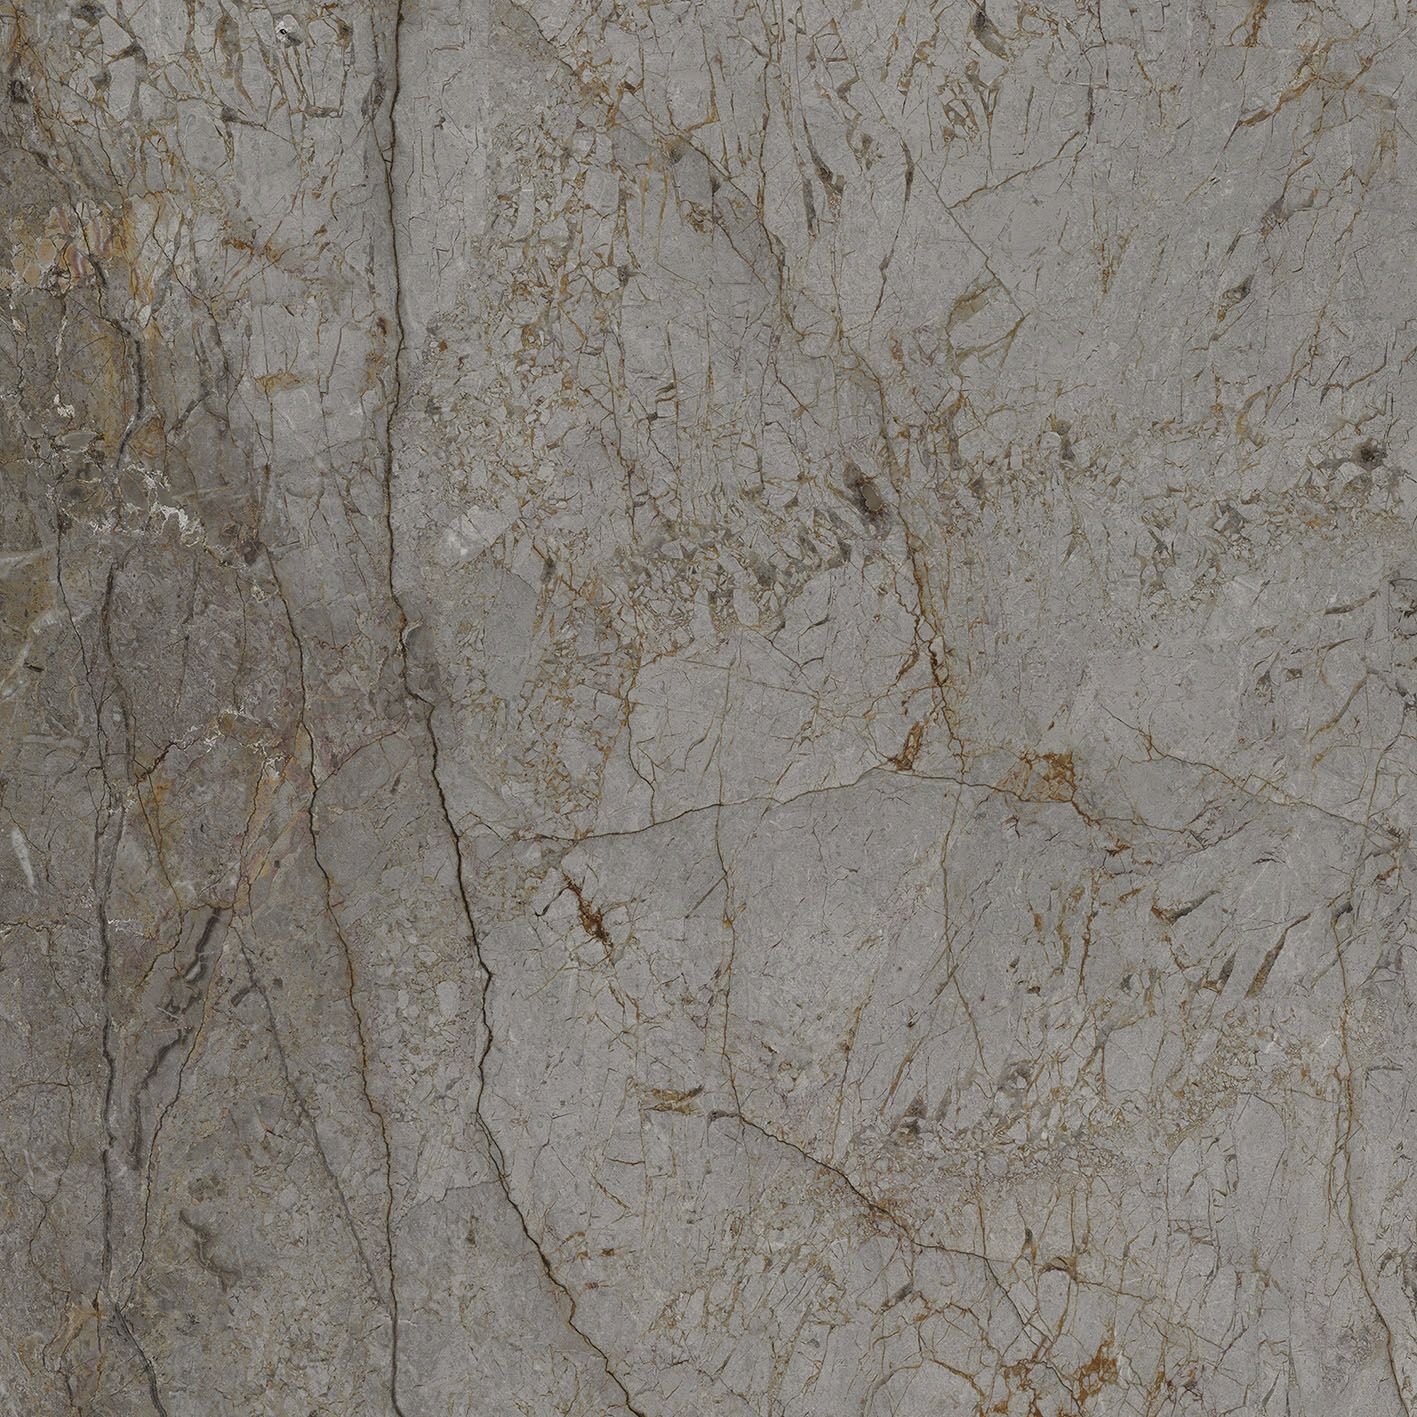 Porcelanosa Astana Grey Polished Large format tile (Call for special pricing)